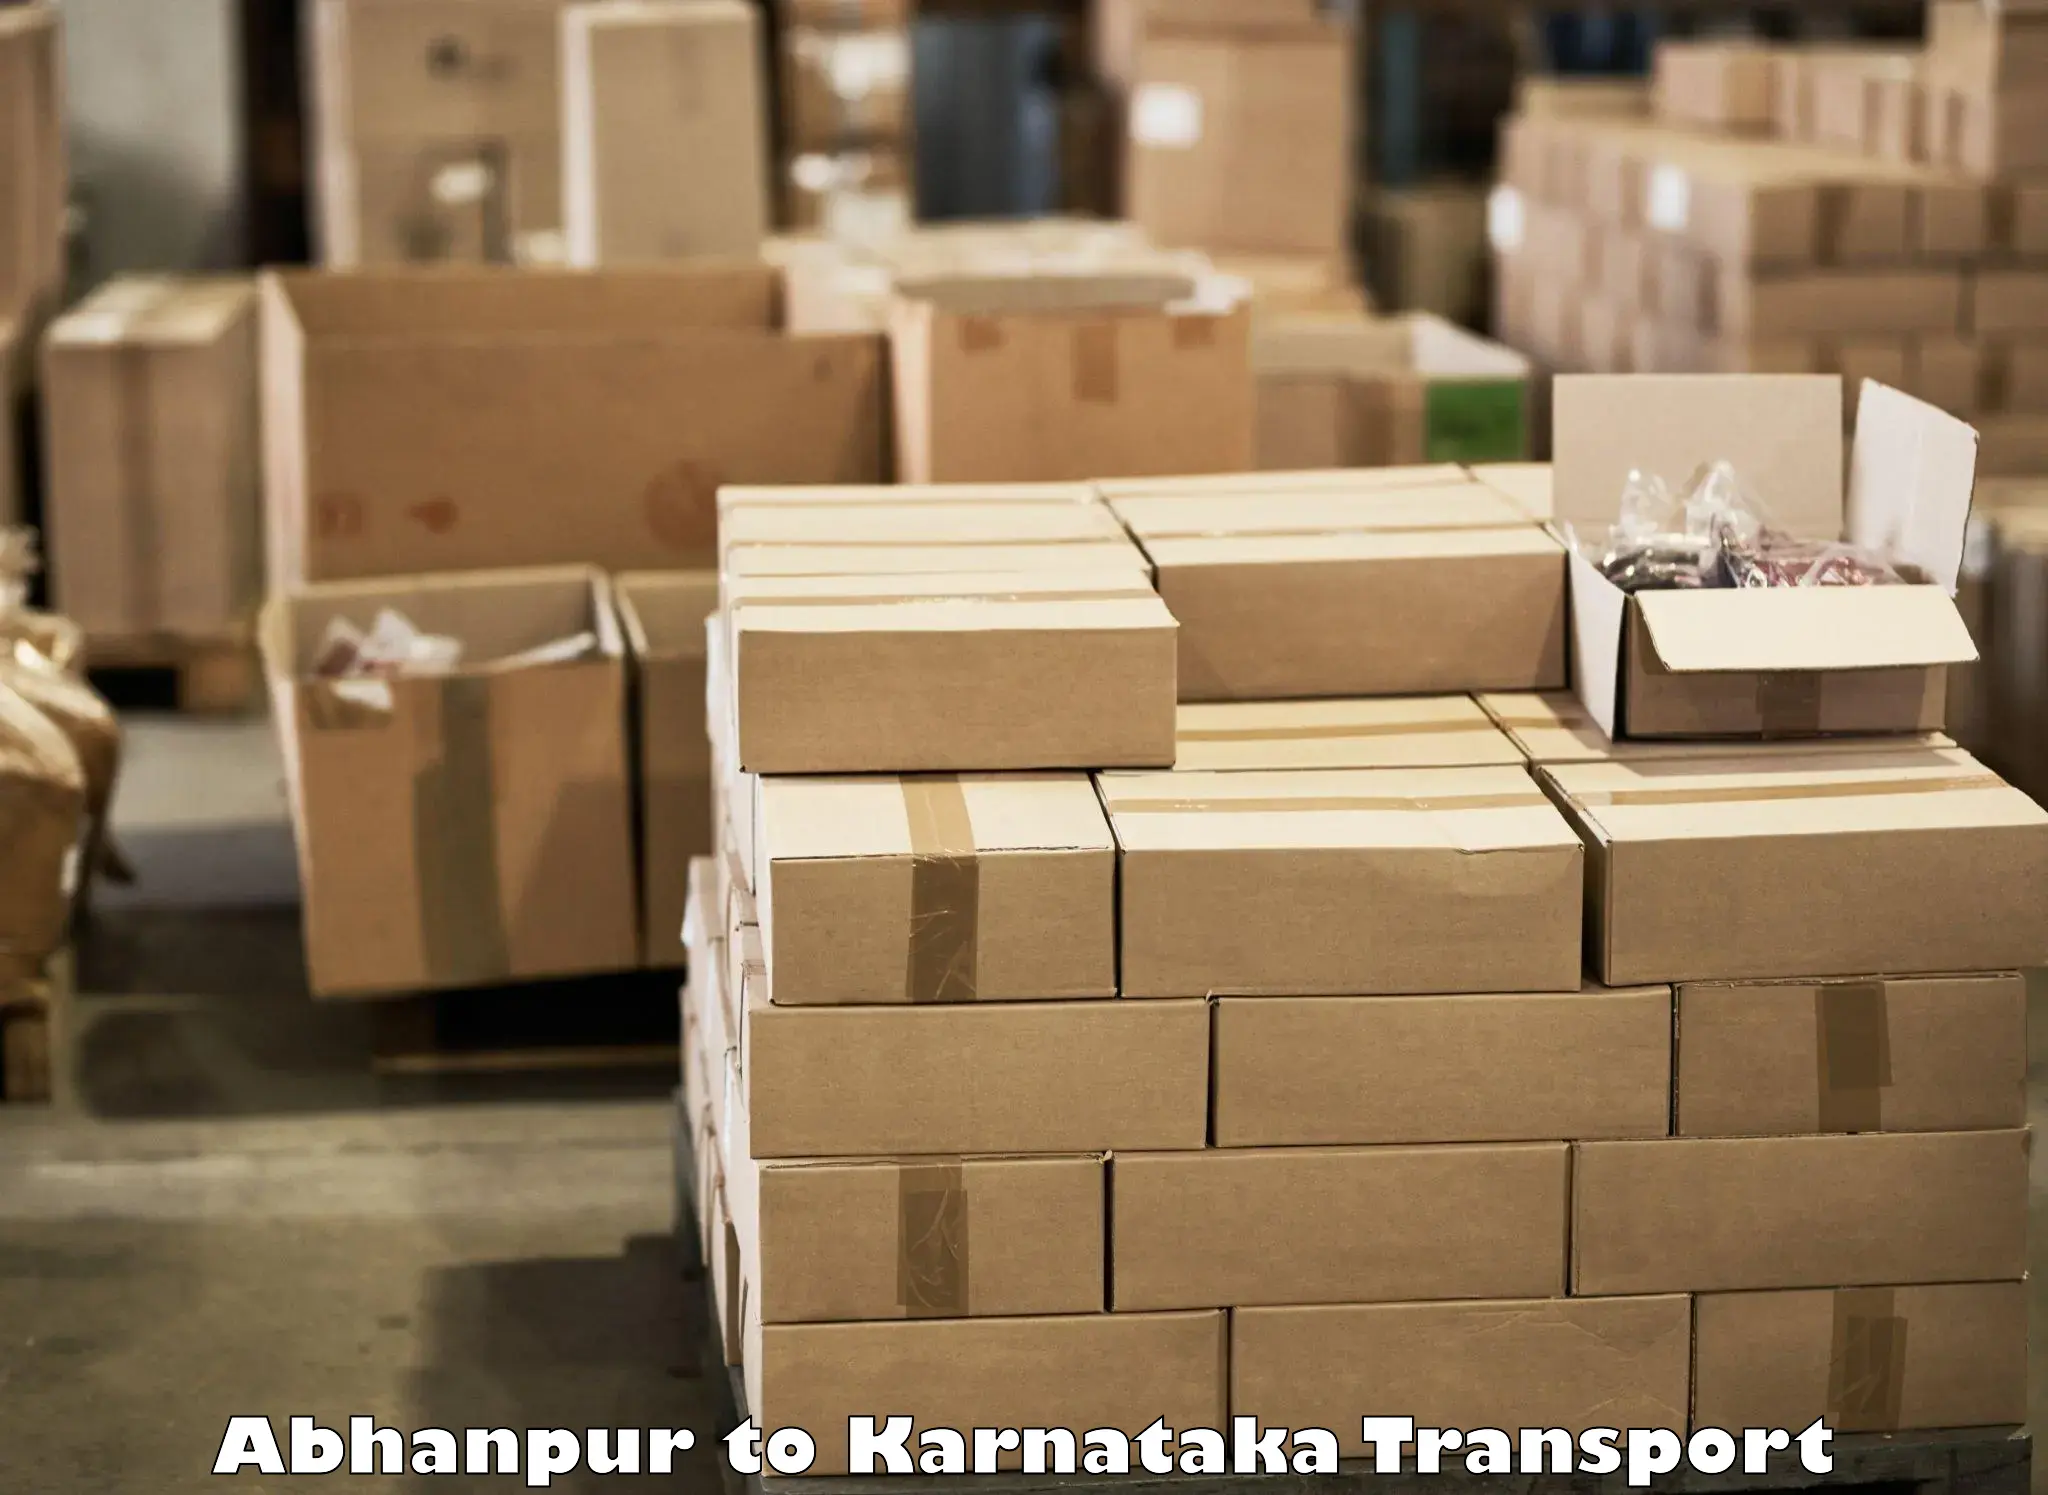 Commercial transport service Abhanpur to Yellapur